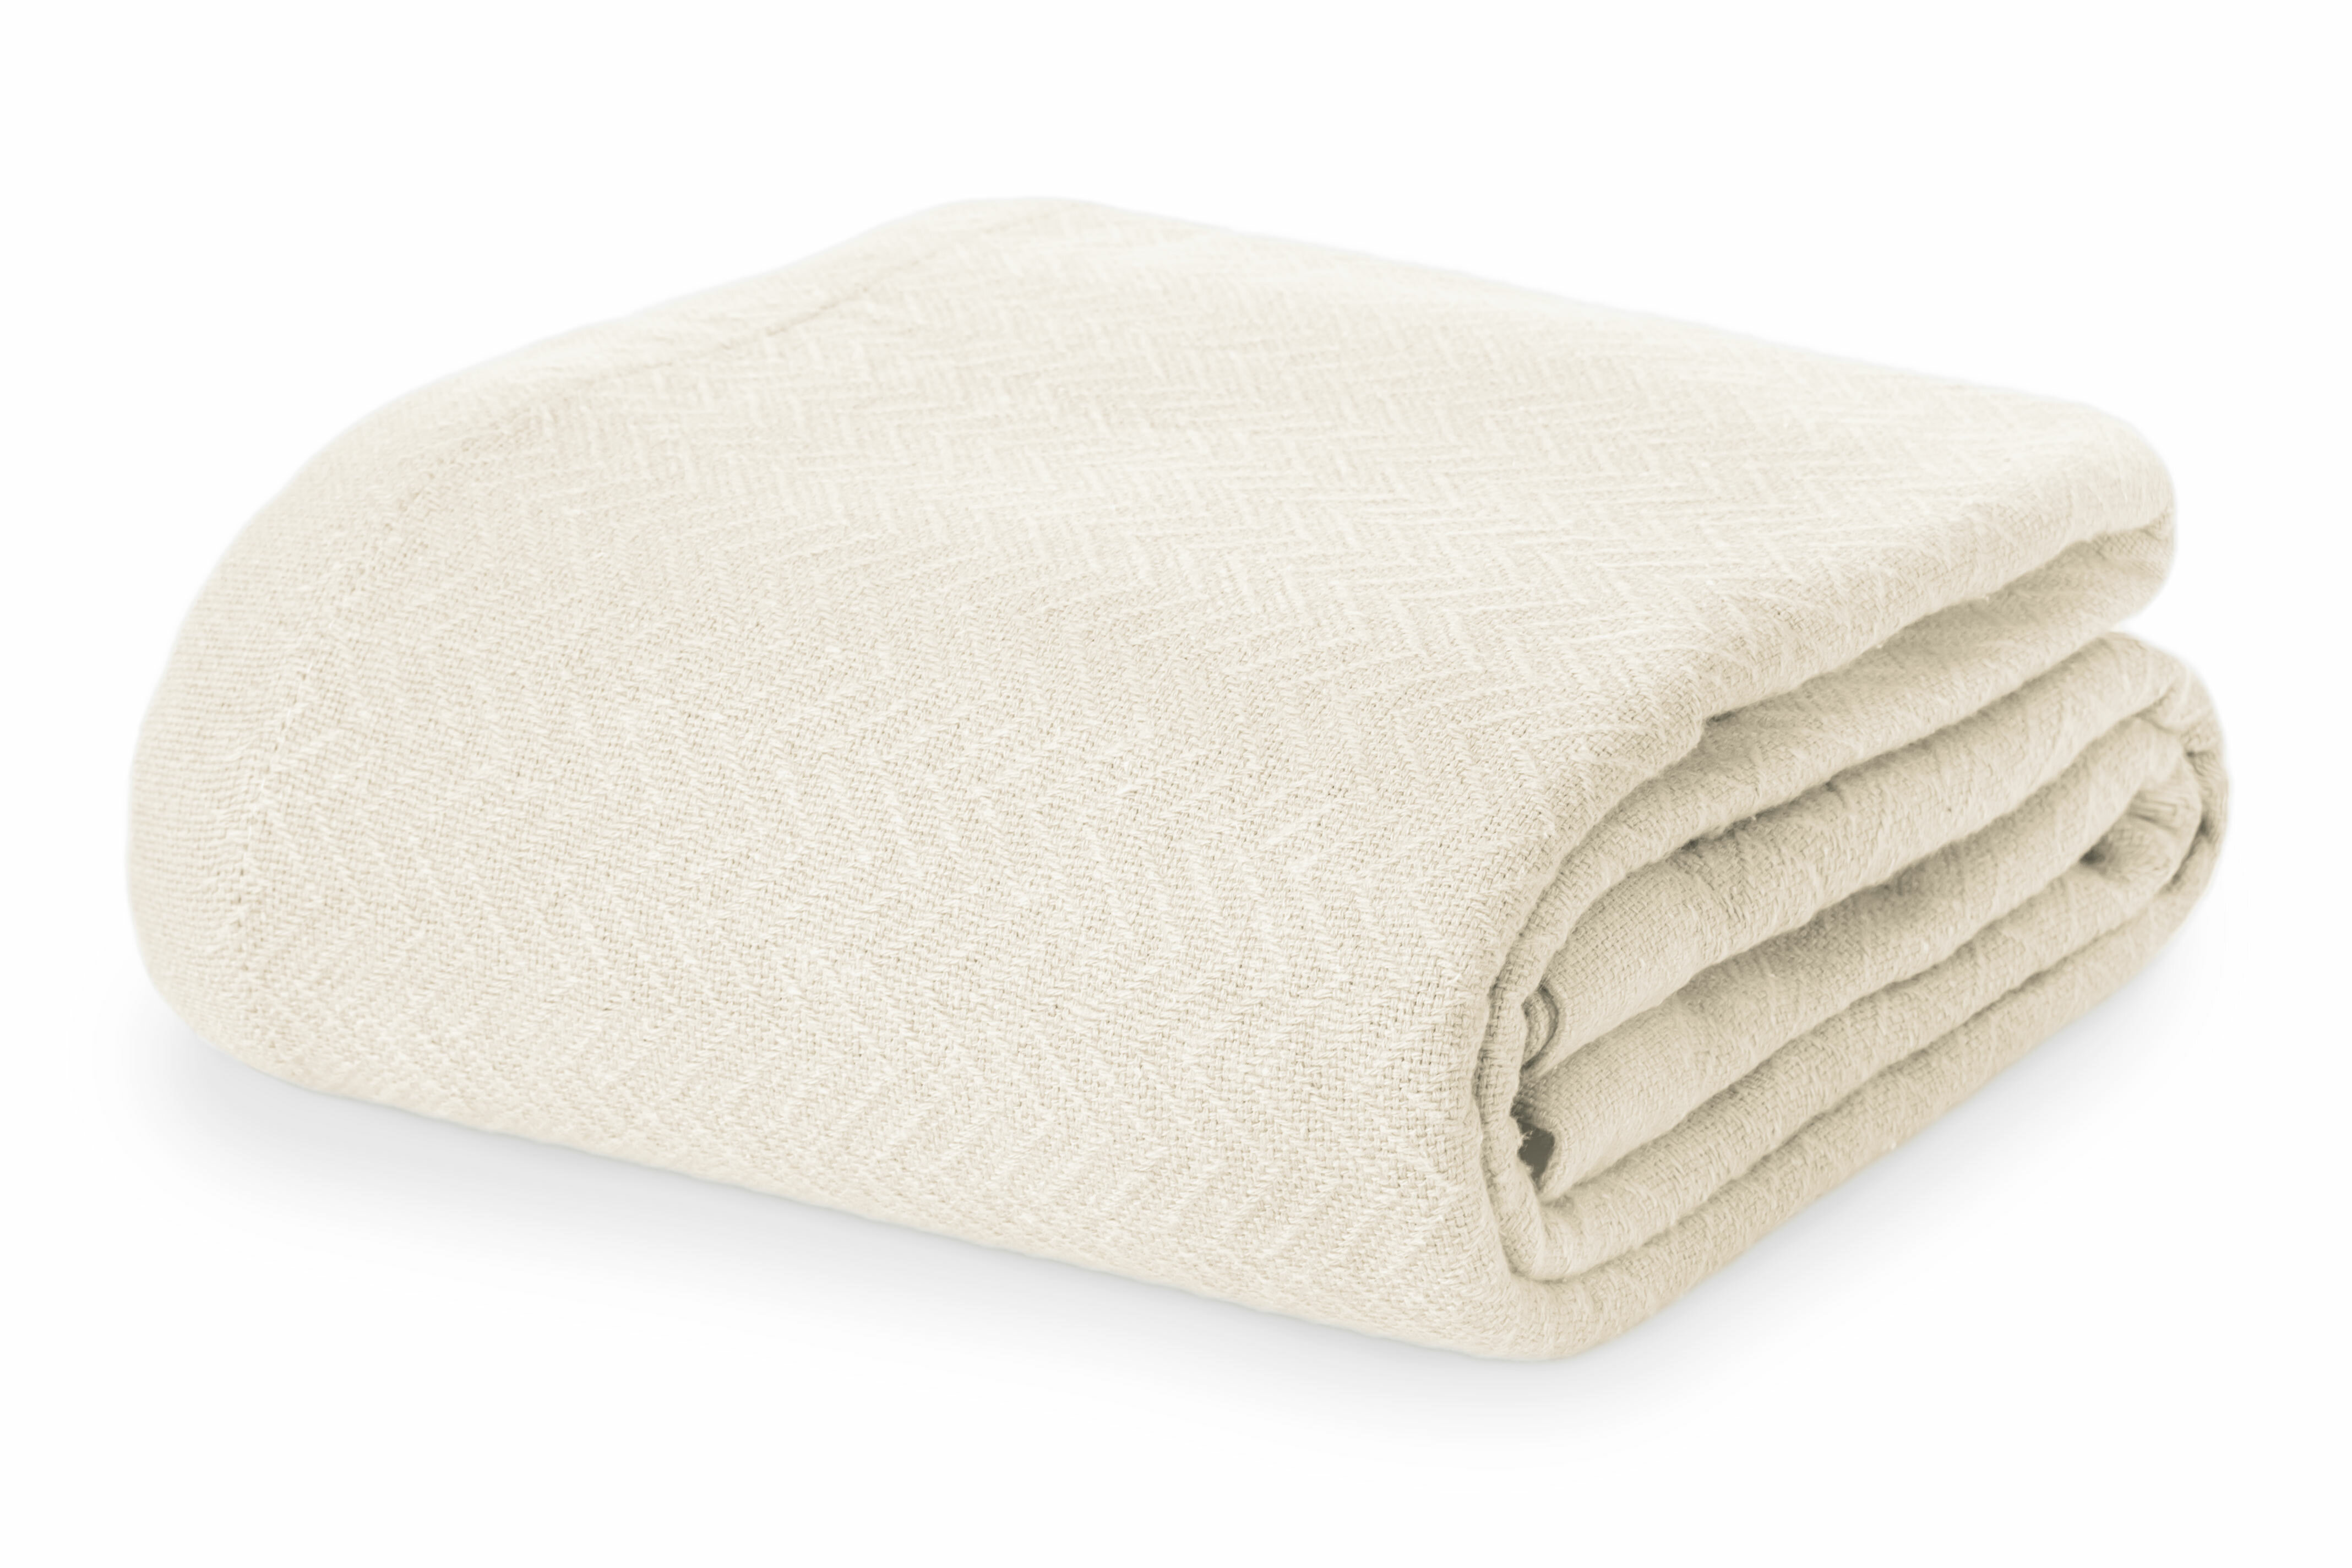 Blanket Lightweight Woven Cotton Herringbone Soft Breathable Neutral Hues Warmth